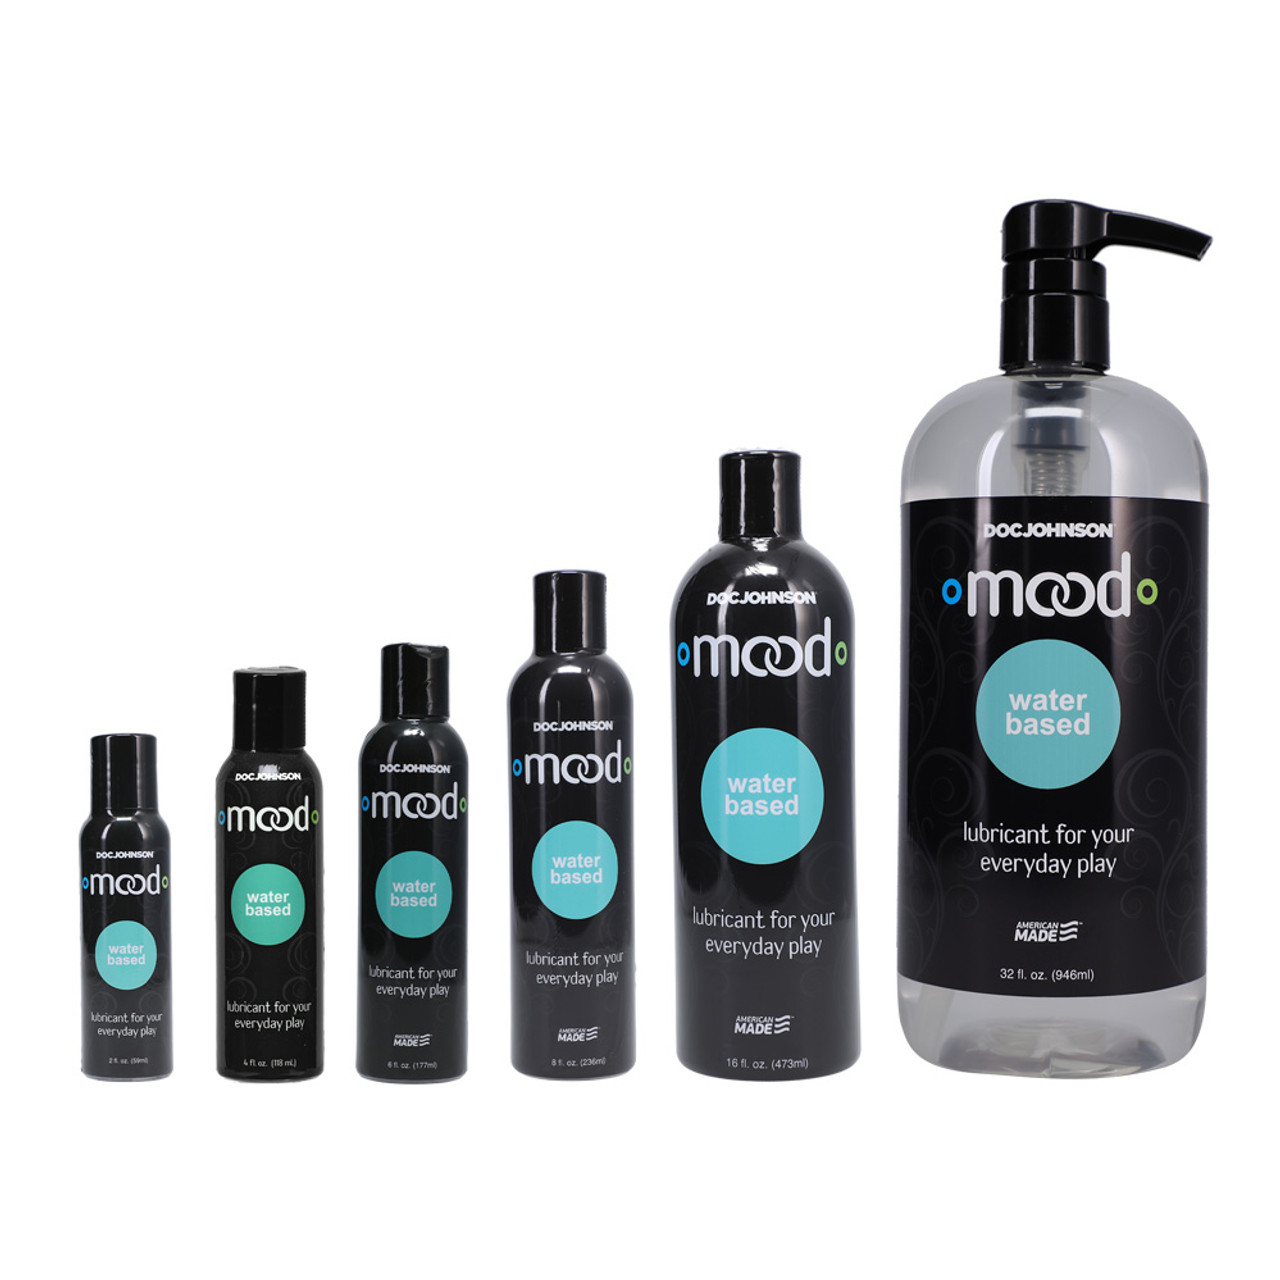 Buy The Mood Lube Water Based Personal Lubricant In 16 Oz